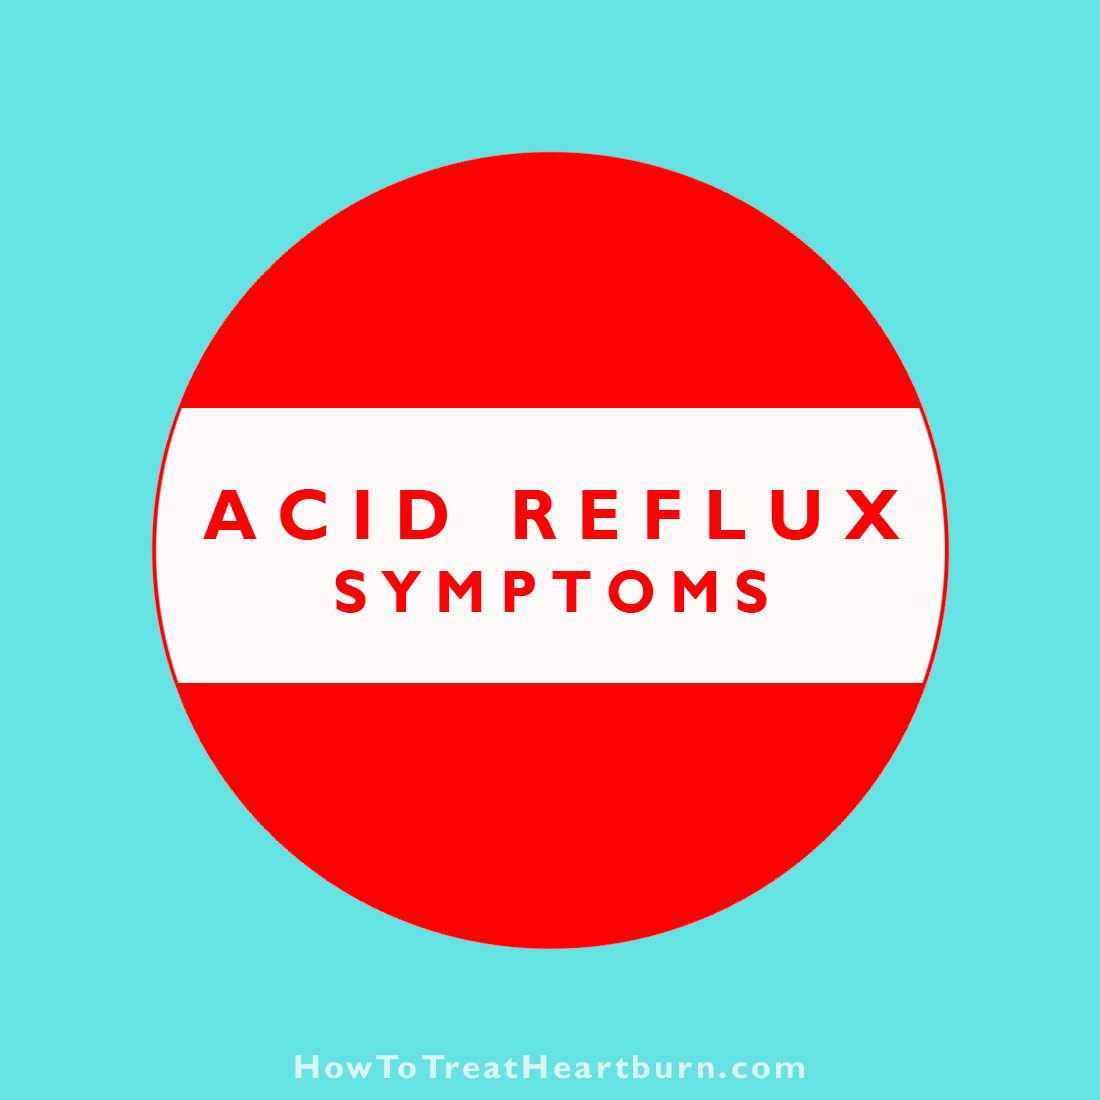 19 Acid Reflux Symptoms You Need To Know - How to Treat ...